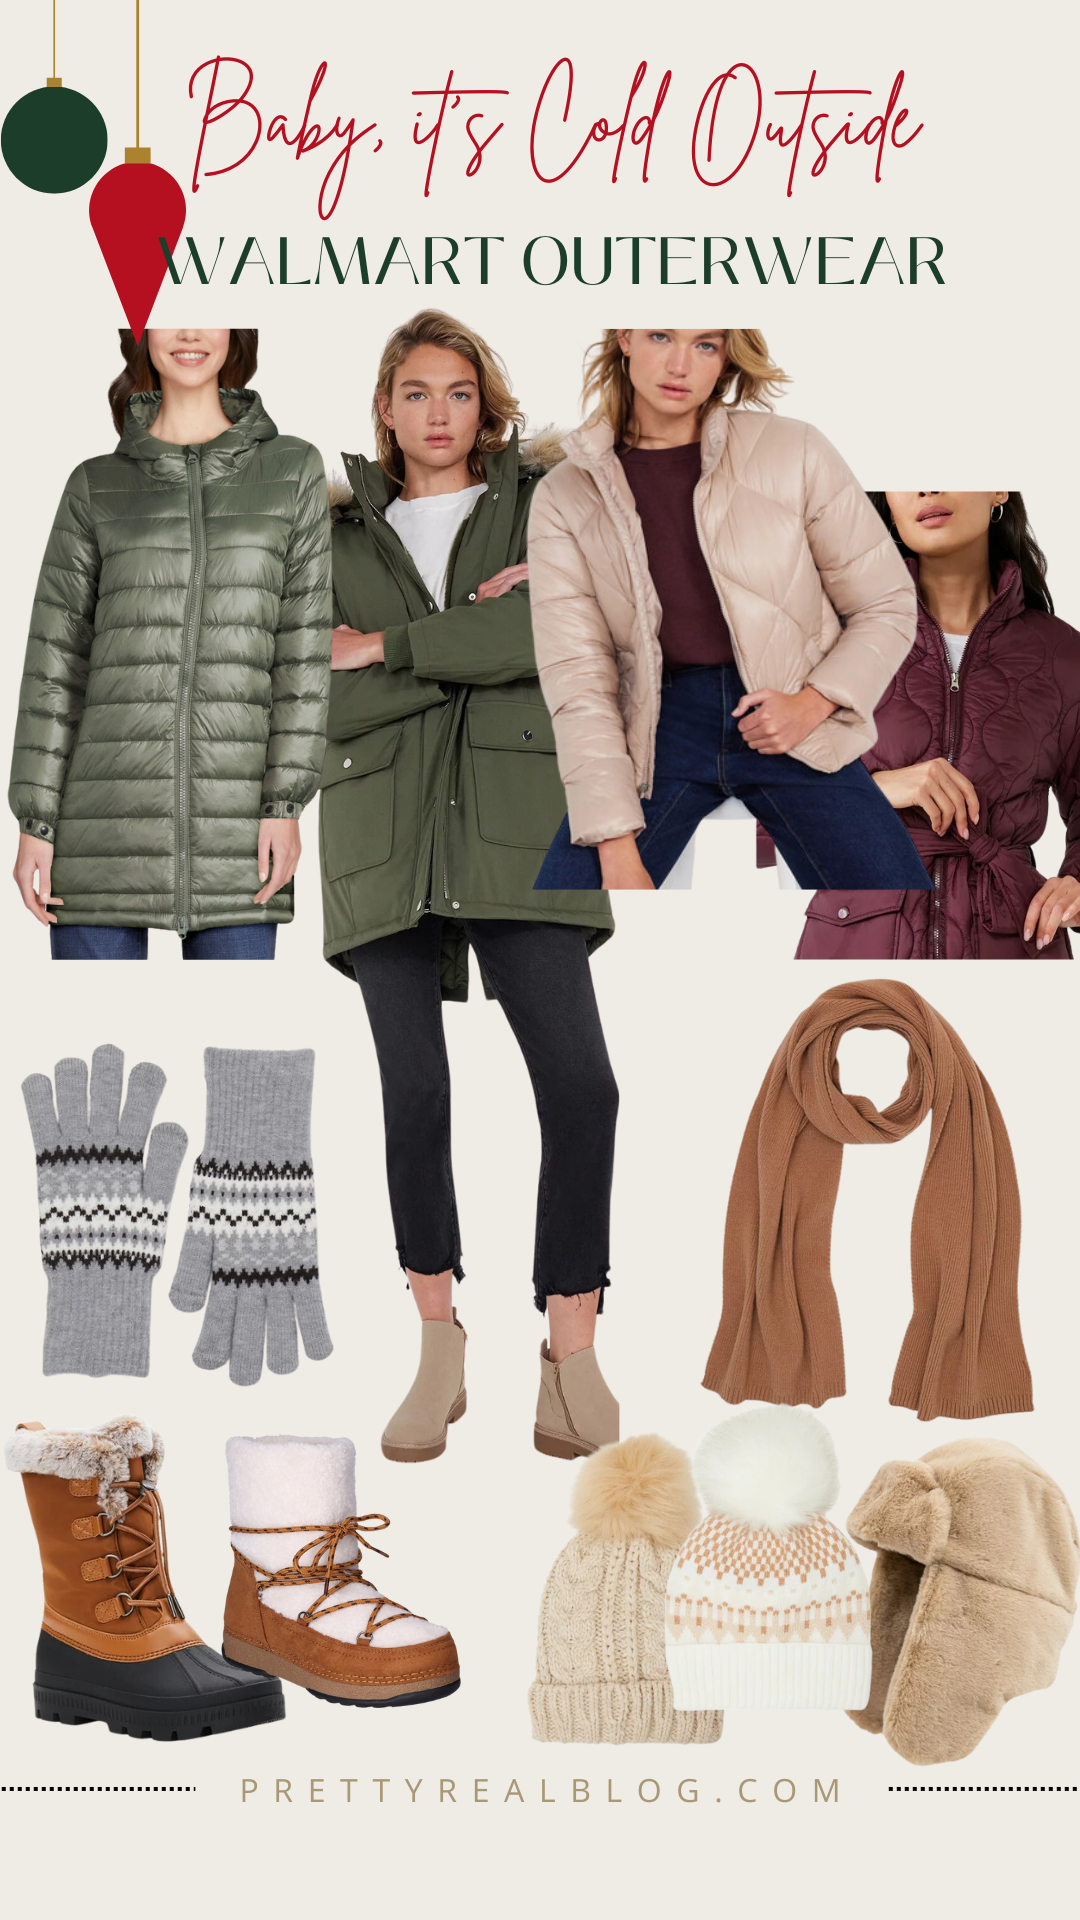 affordable cold weather essentials from Walmart!